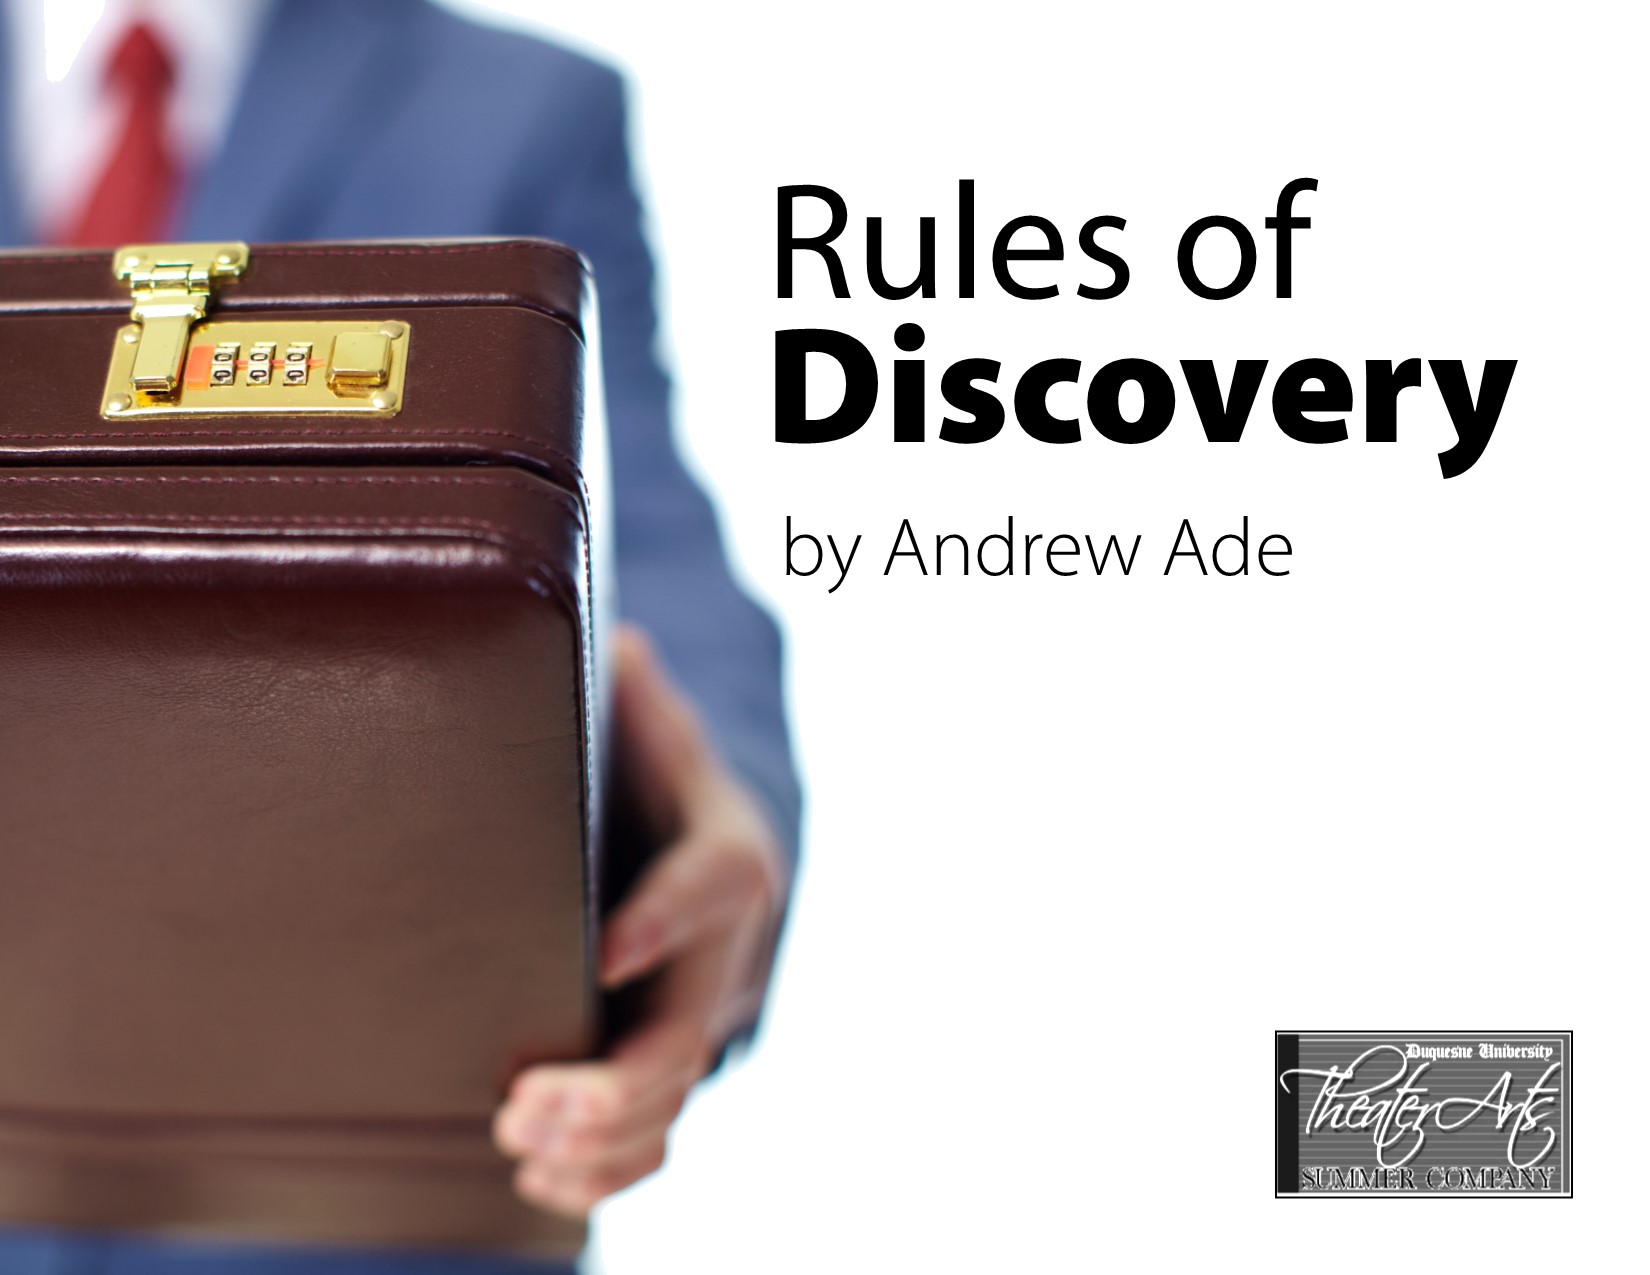 Rules of Discovery.jpg